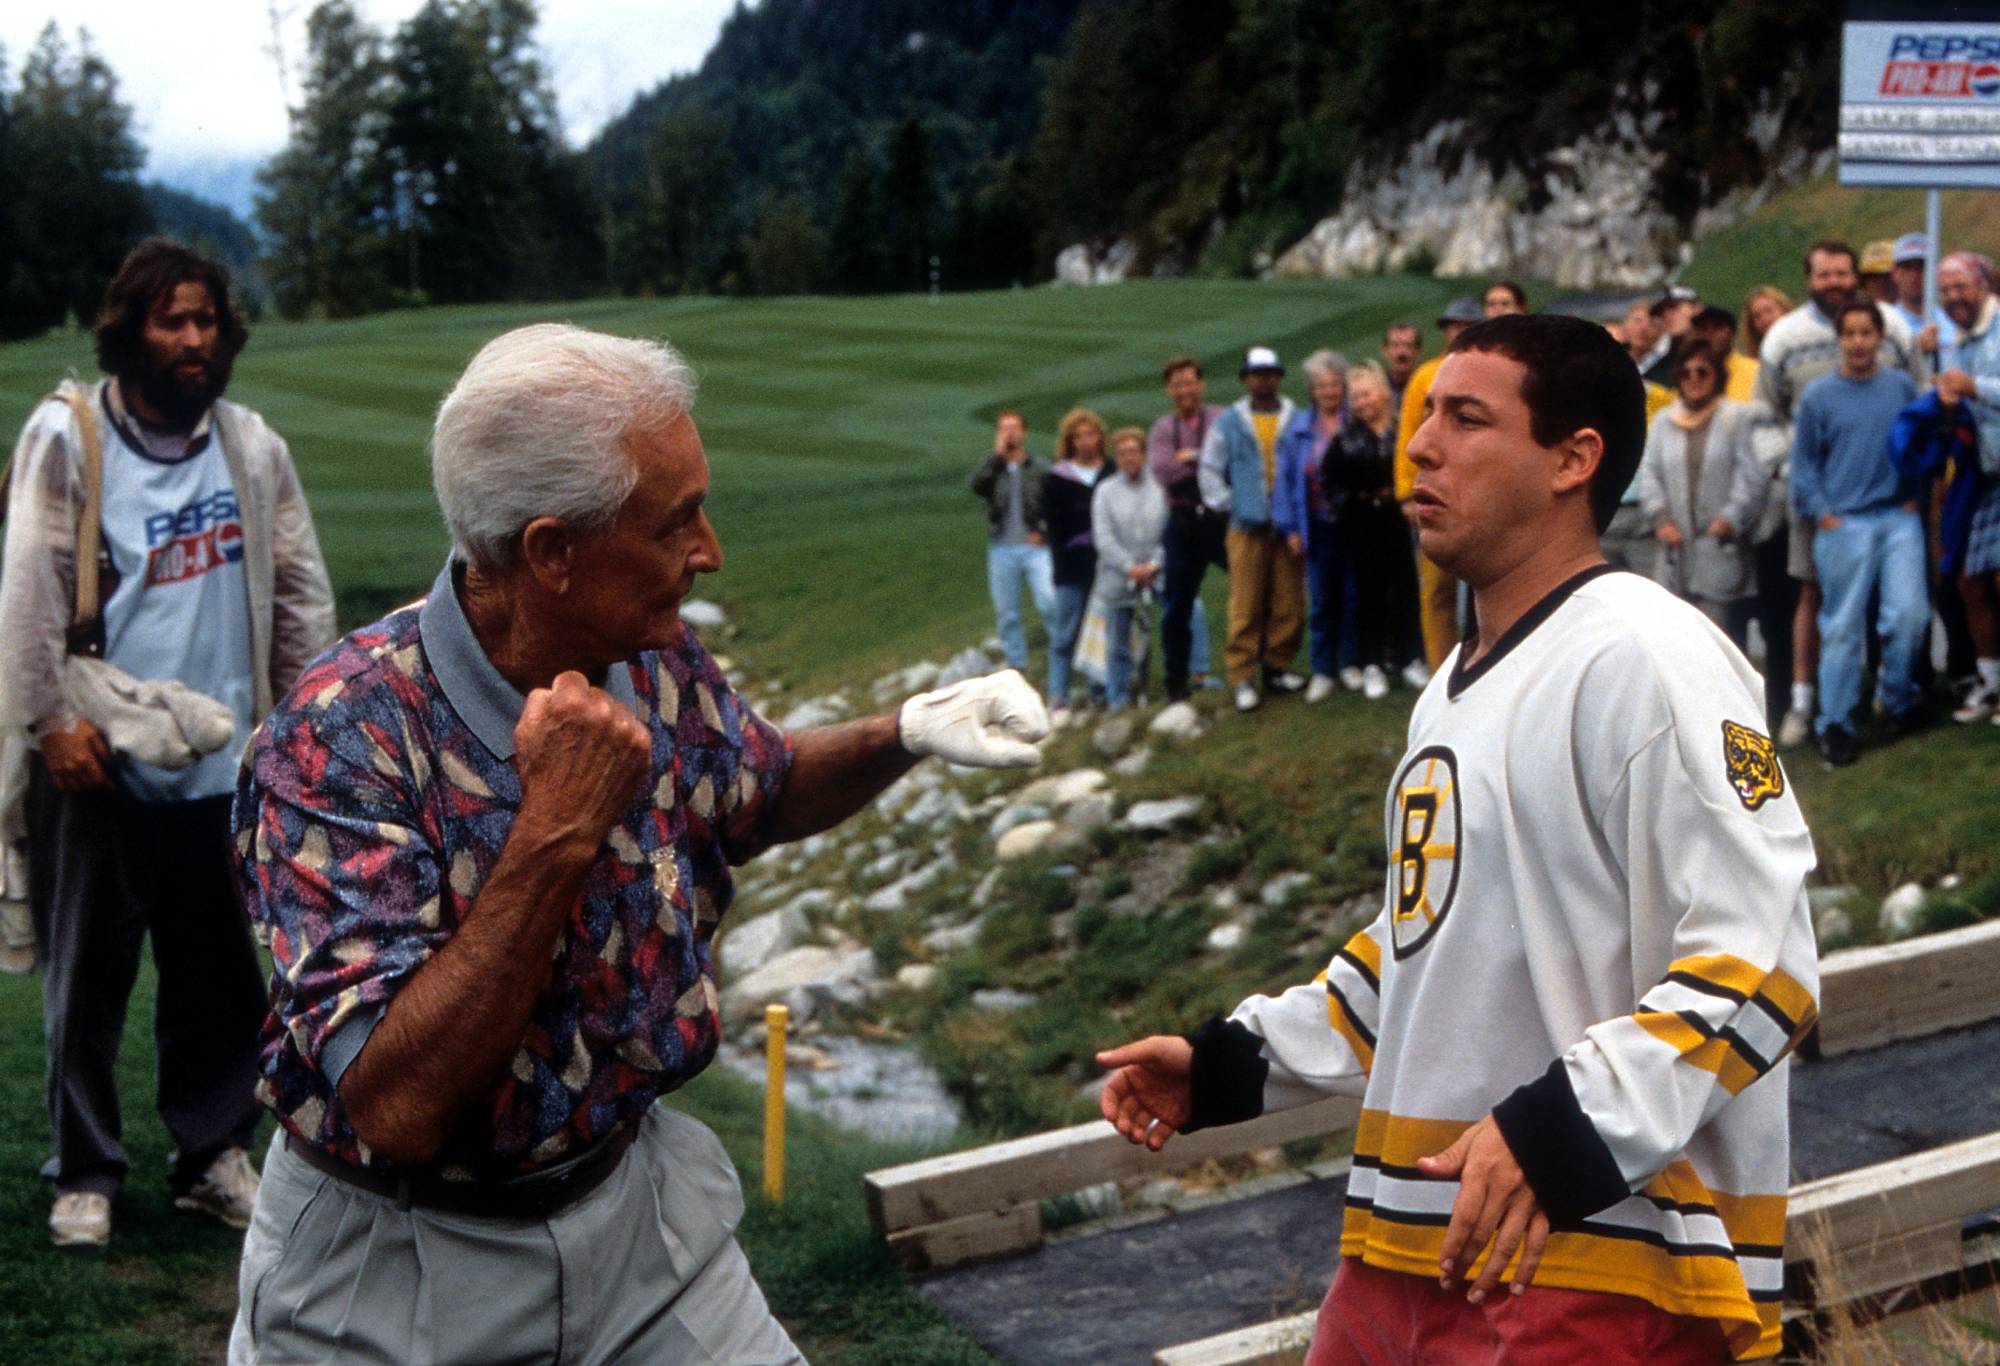 Bob Barker prepares to punch Happy Gilmore. (Photo by Universal/Getty Images)